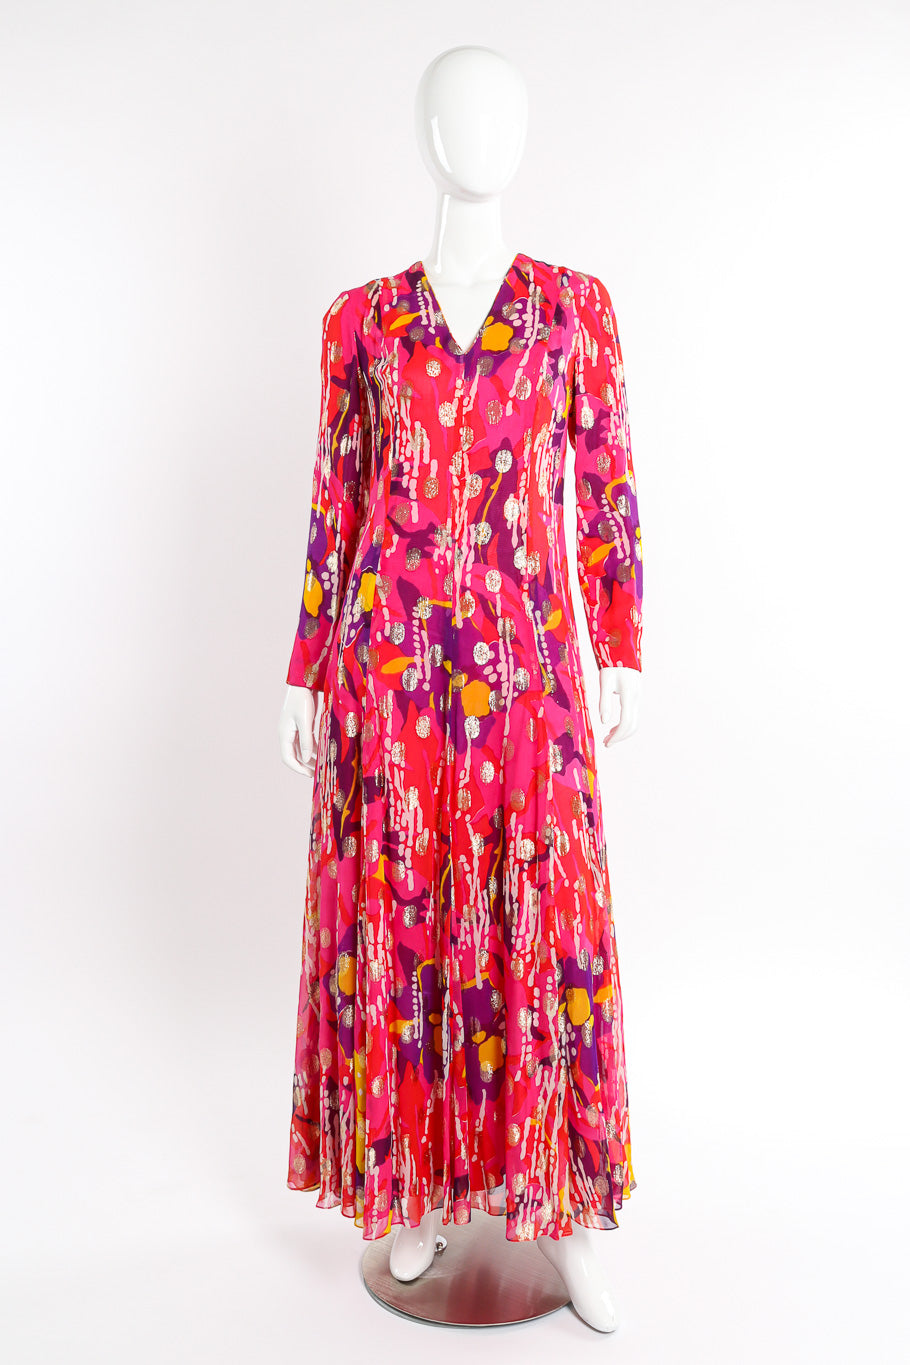 Vintage Doreen Loh Abstract Floral Print Maxi Dress front view on mannequin @Recessla